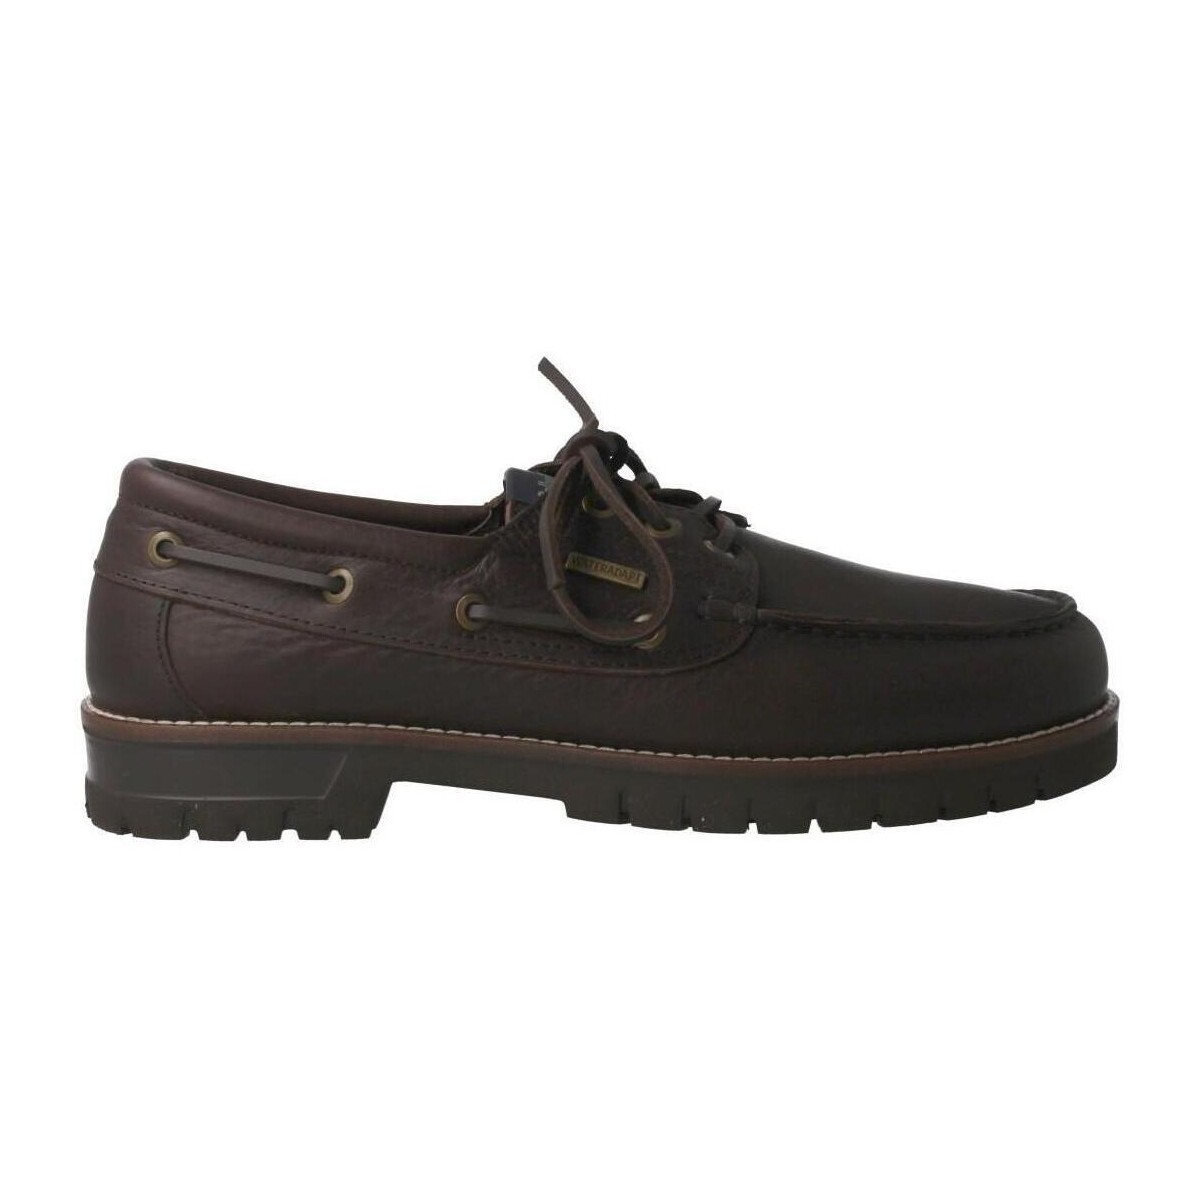 Boat shoes CallagHan